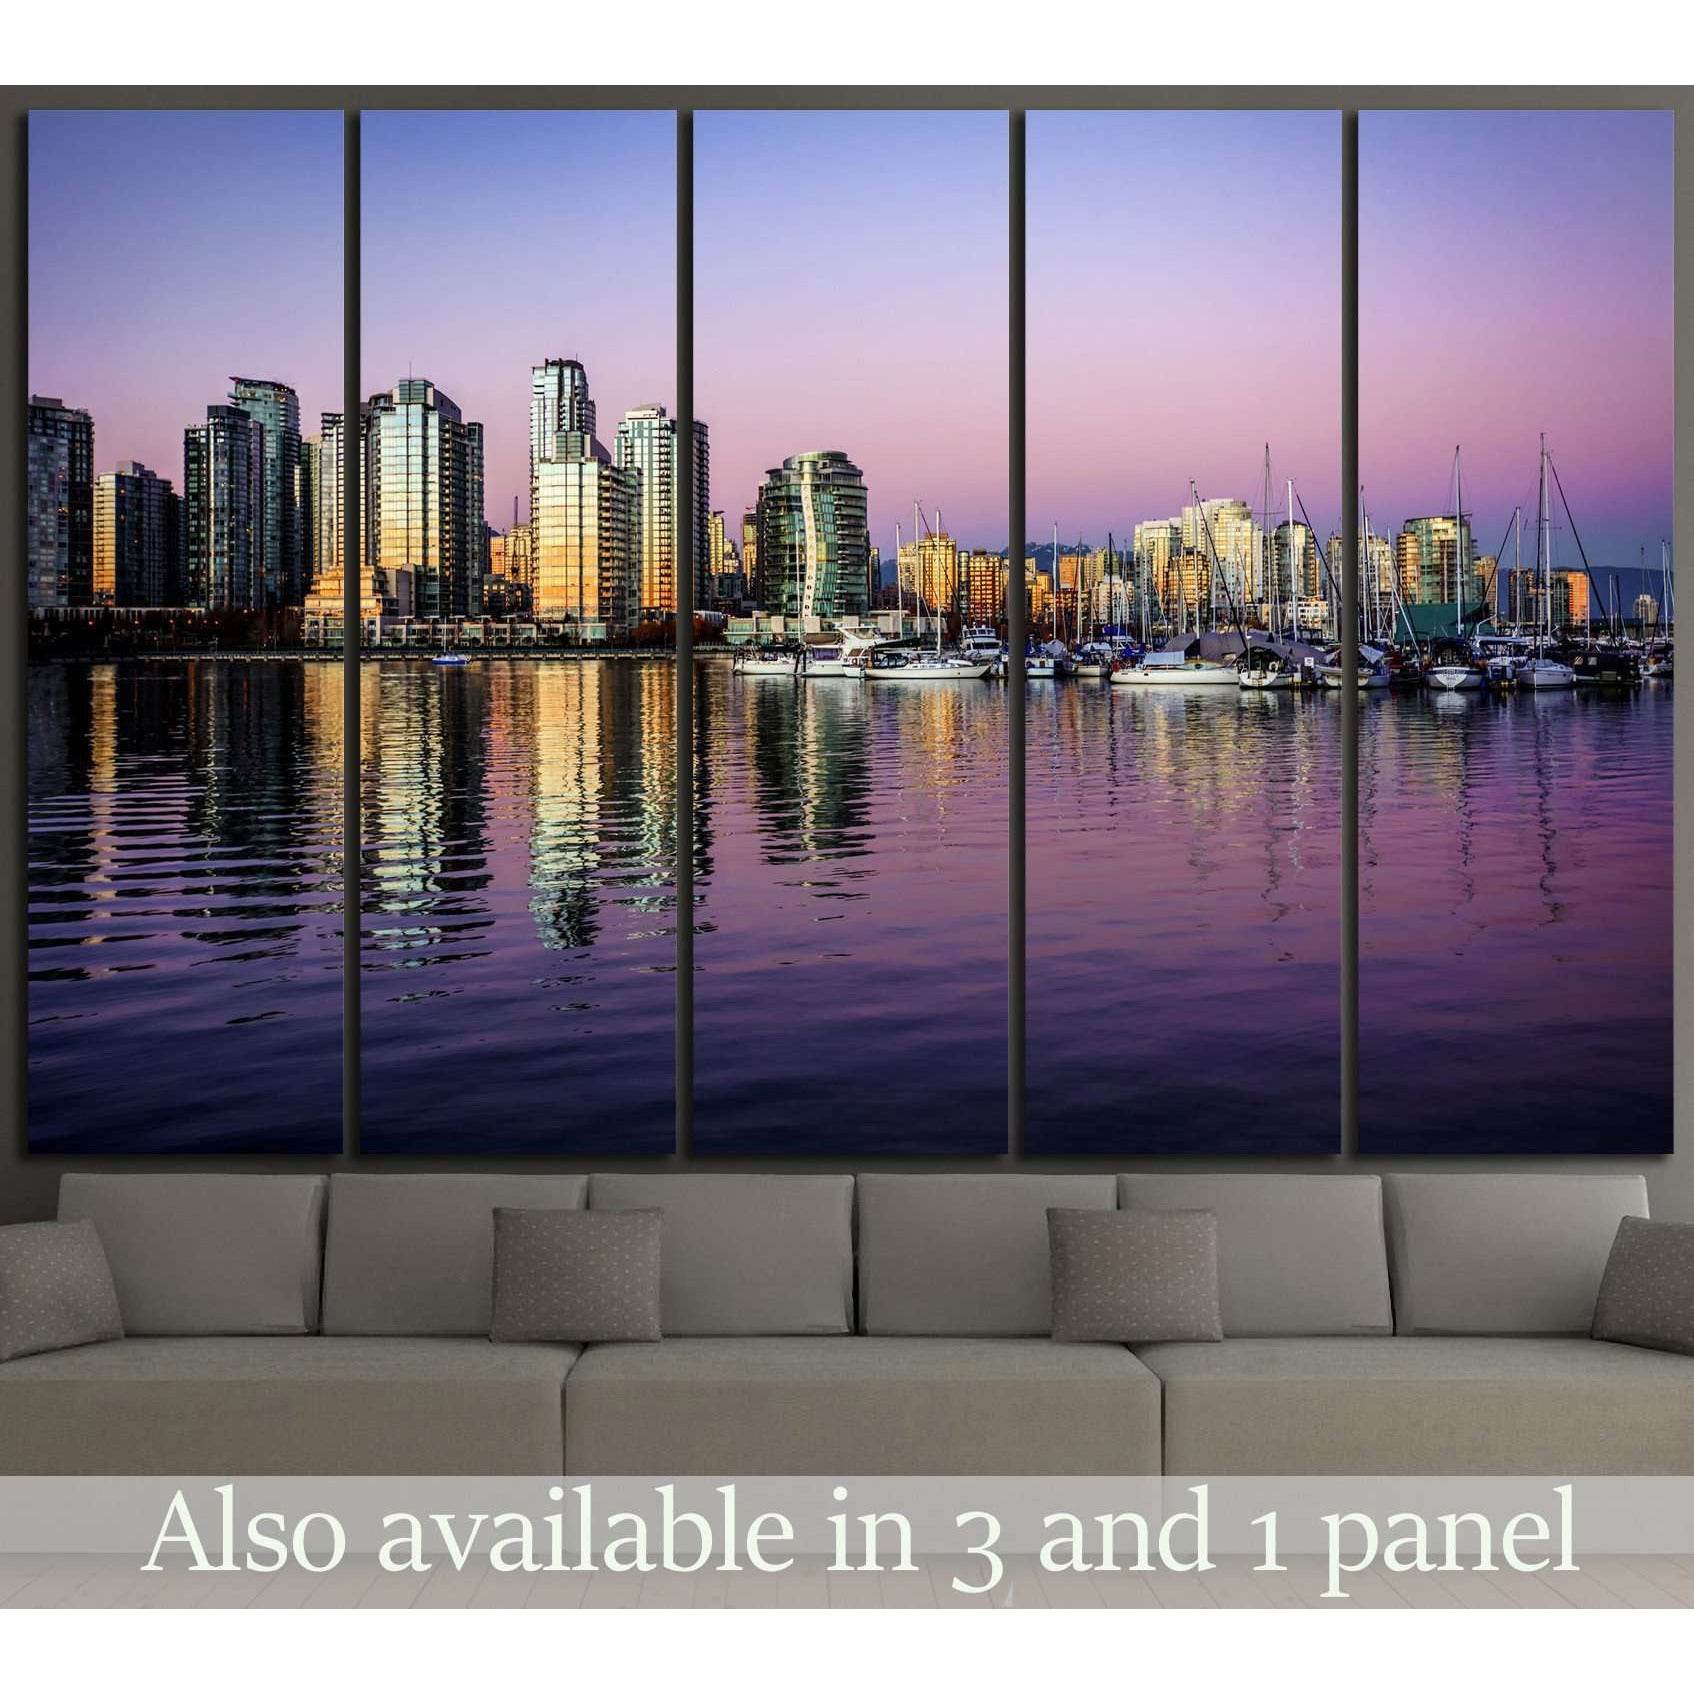 buildings on the waterfront №852 Ready to Hang Canvas Print